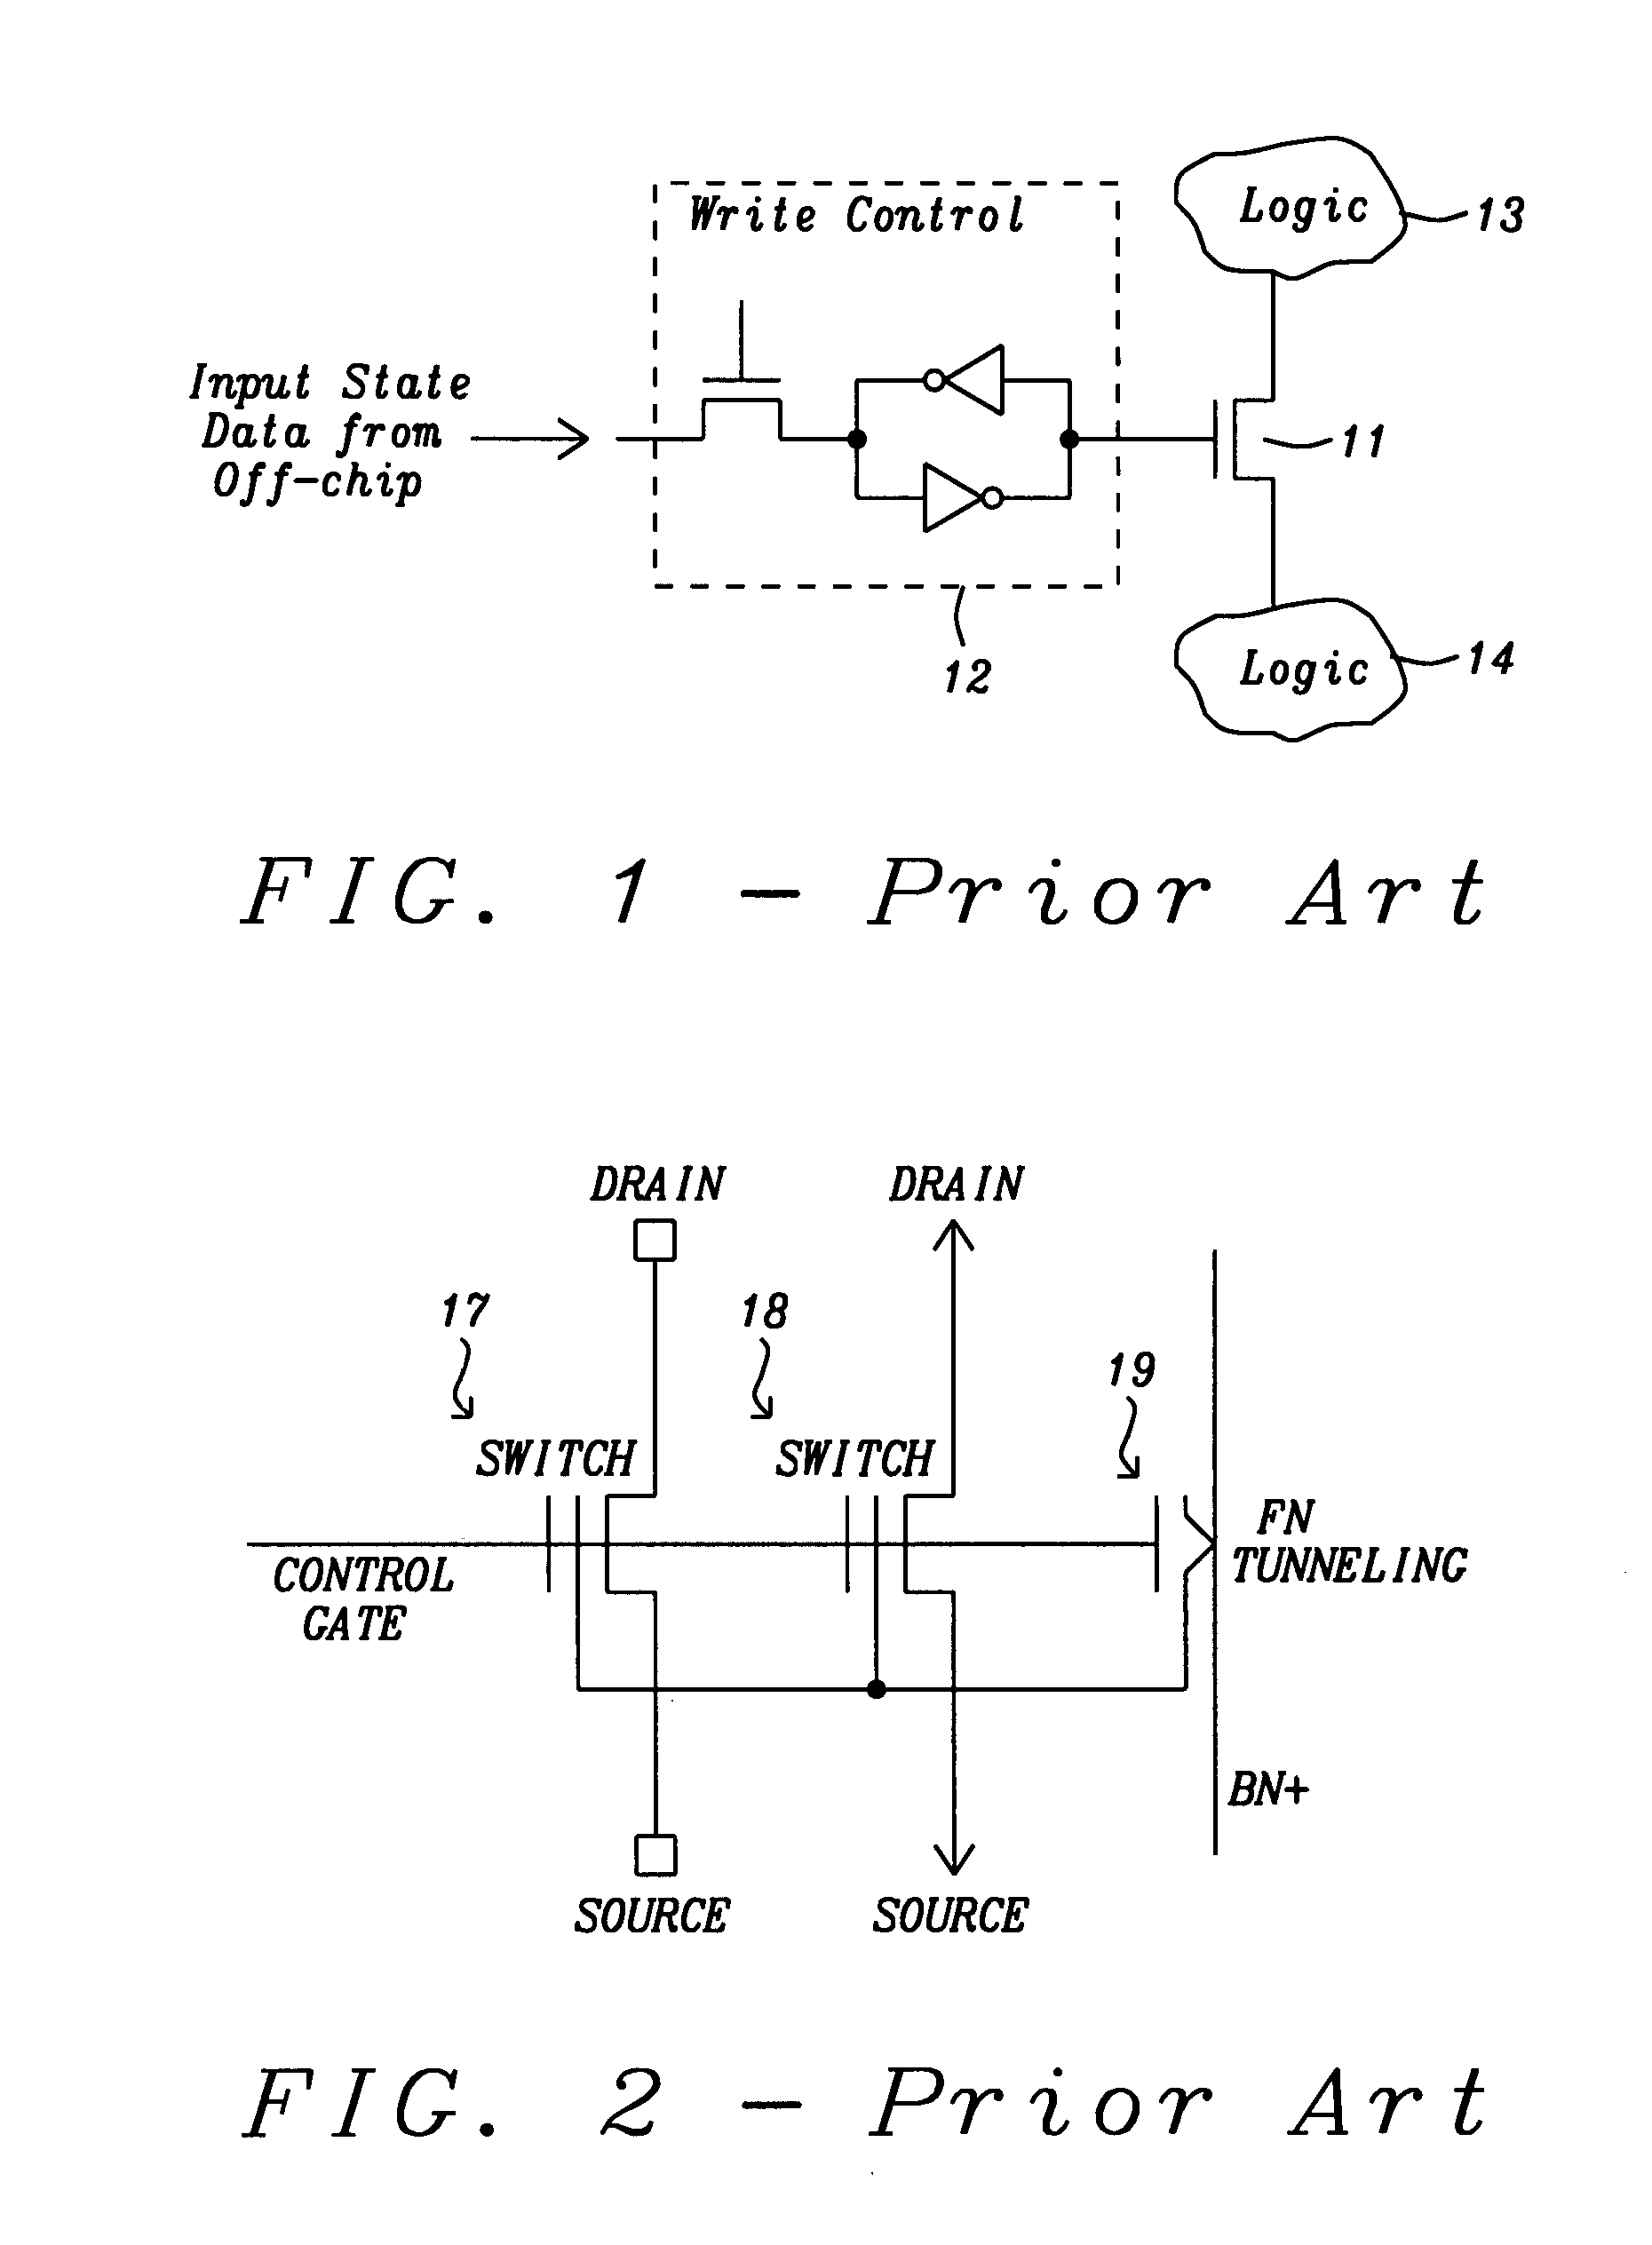 Trap-charge non-volatile switch connector for programmable logic